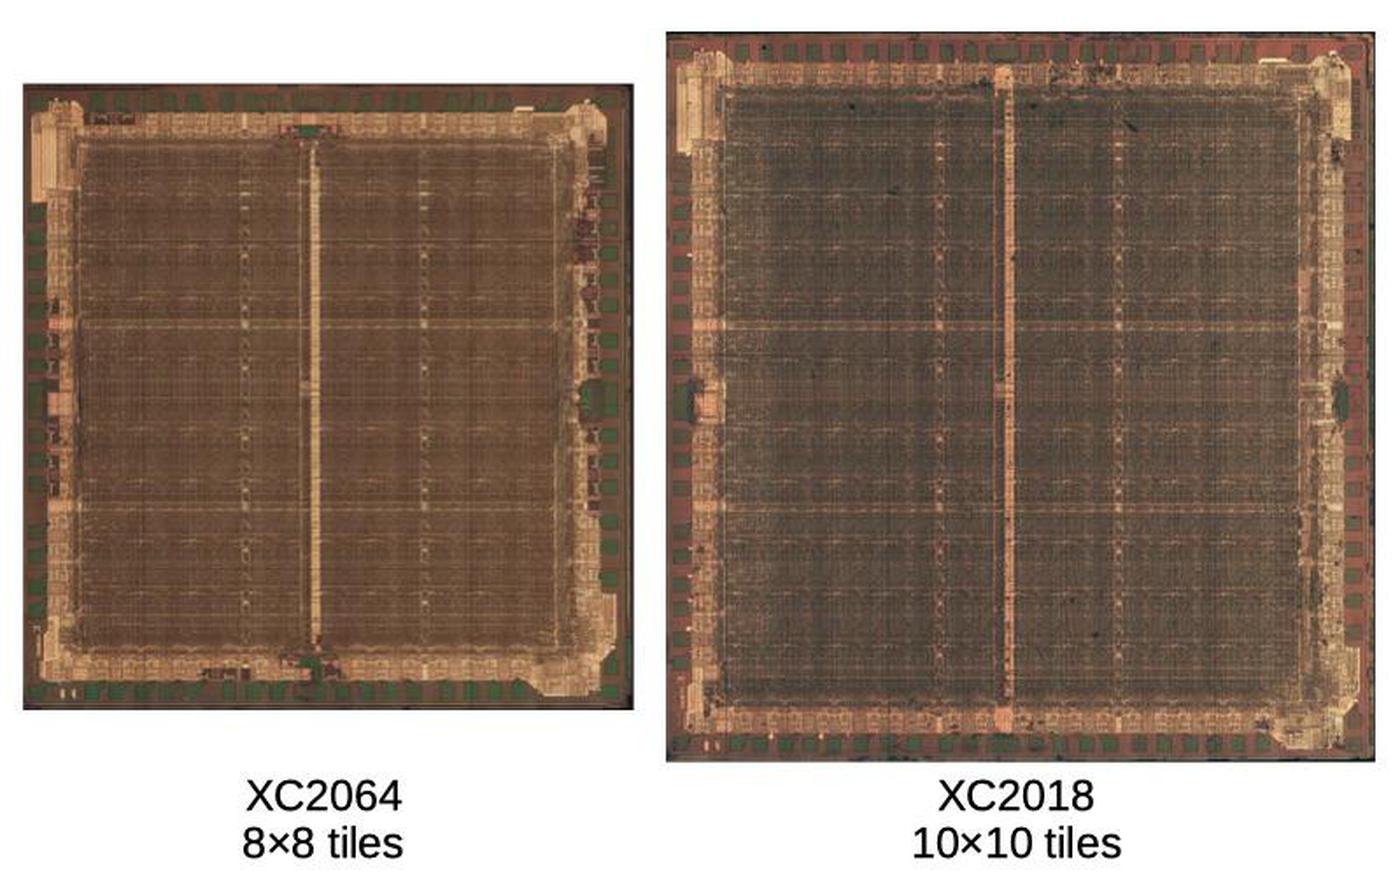 Comparison of the XC2064 and XC2018 dies. The images are scaled so the tile sizes match; I don't know how the physical sizes of the dies compare. Die photos from siliconpr0n.